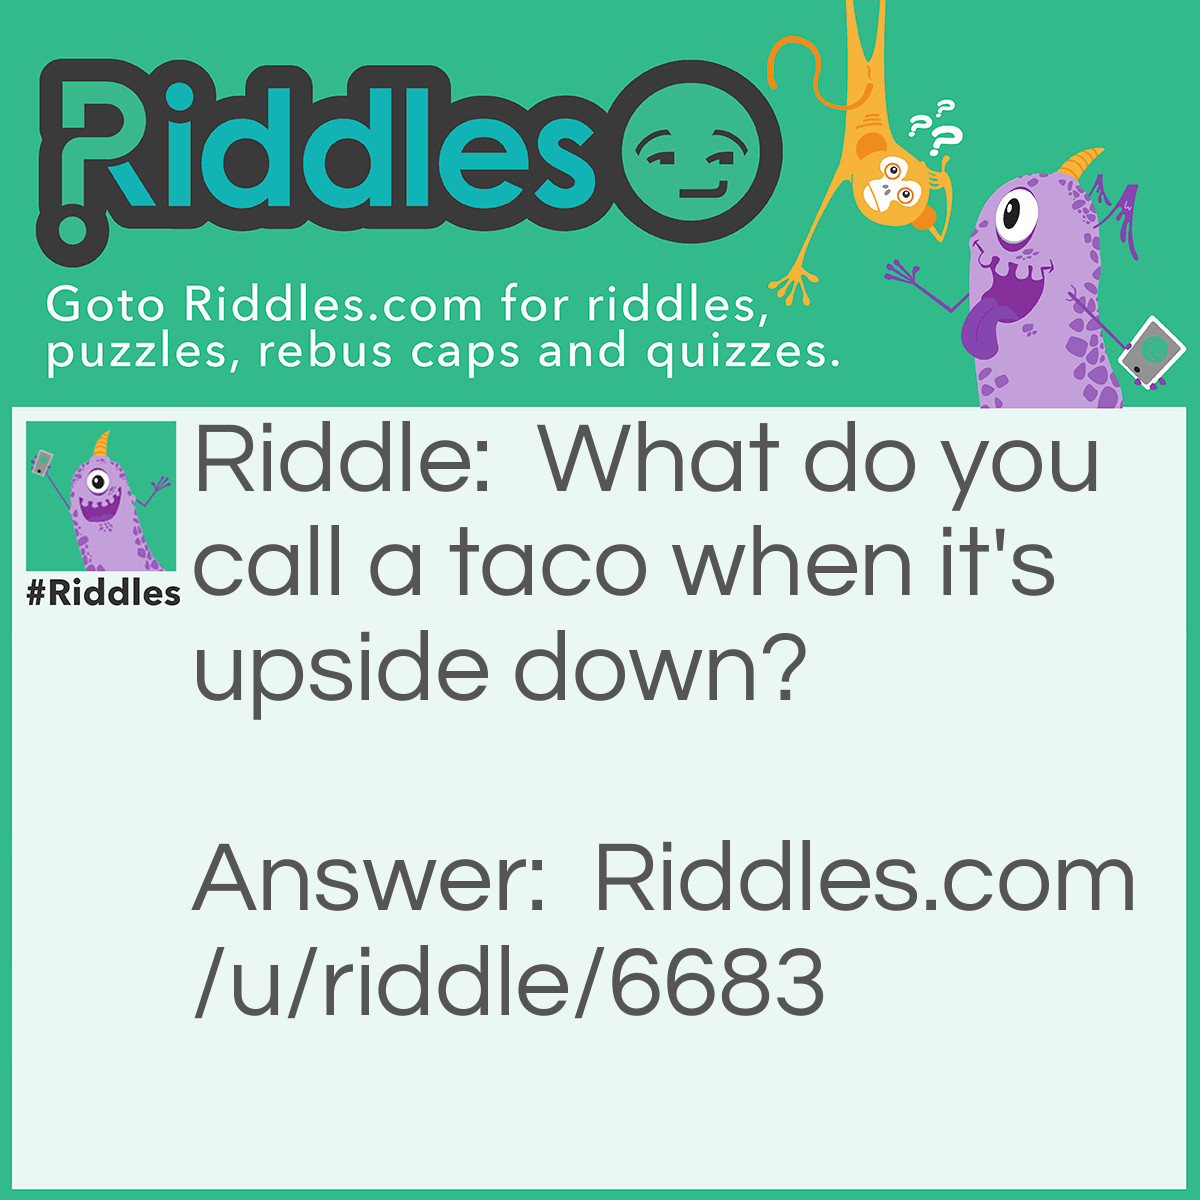 Riddle: What do you call a taco when it's upside down? Answer: An empty taco.